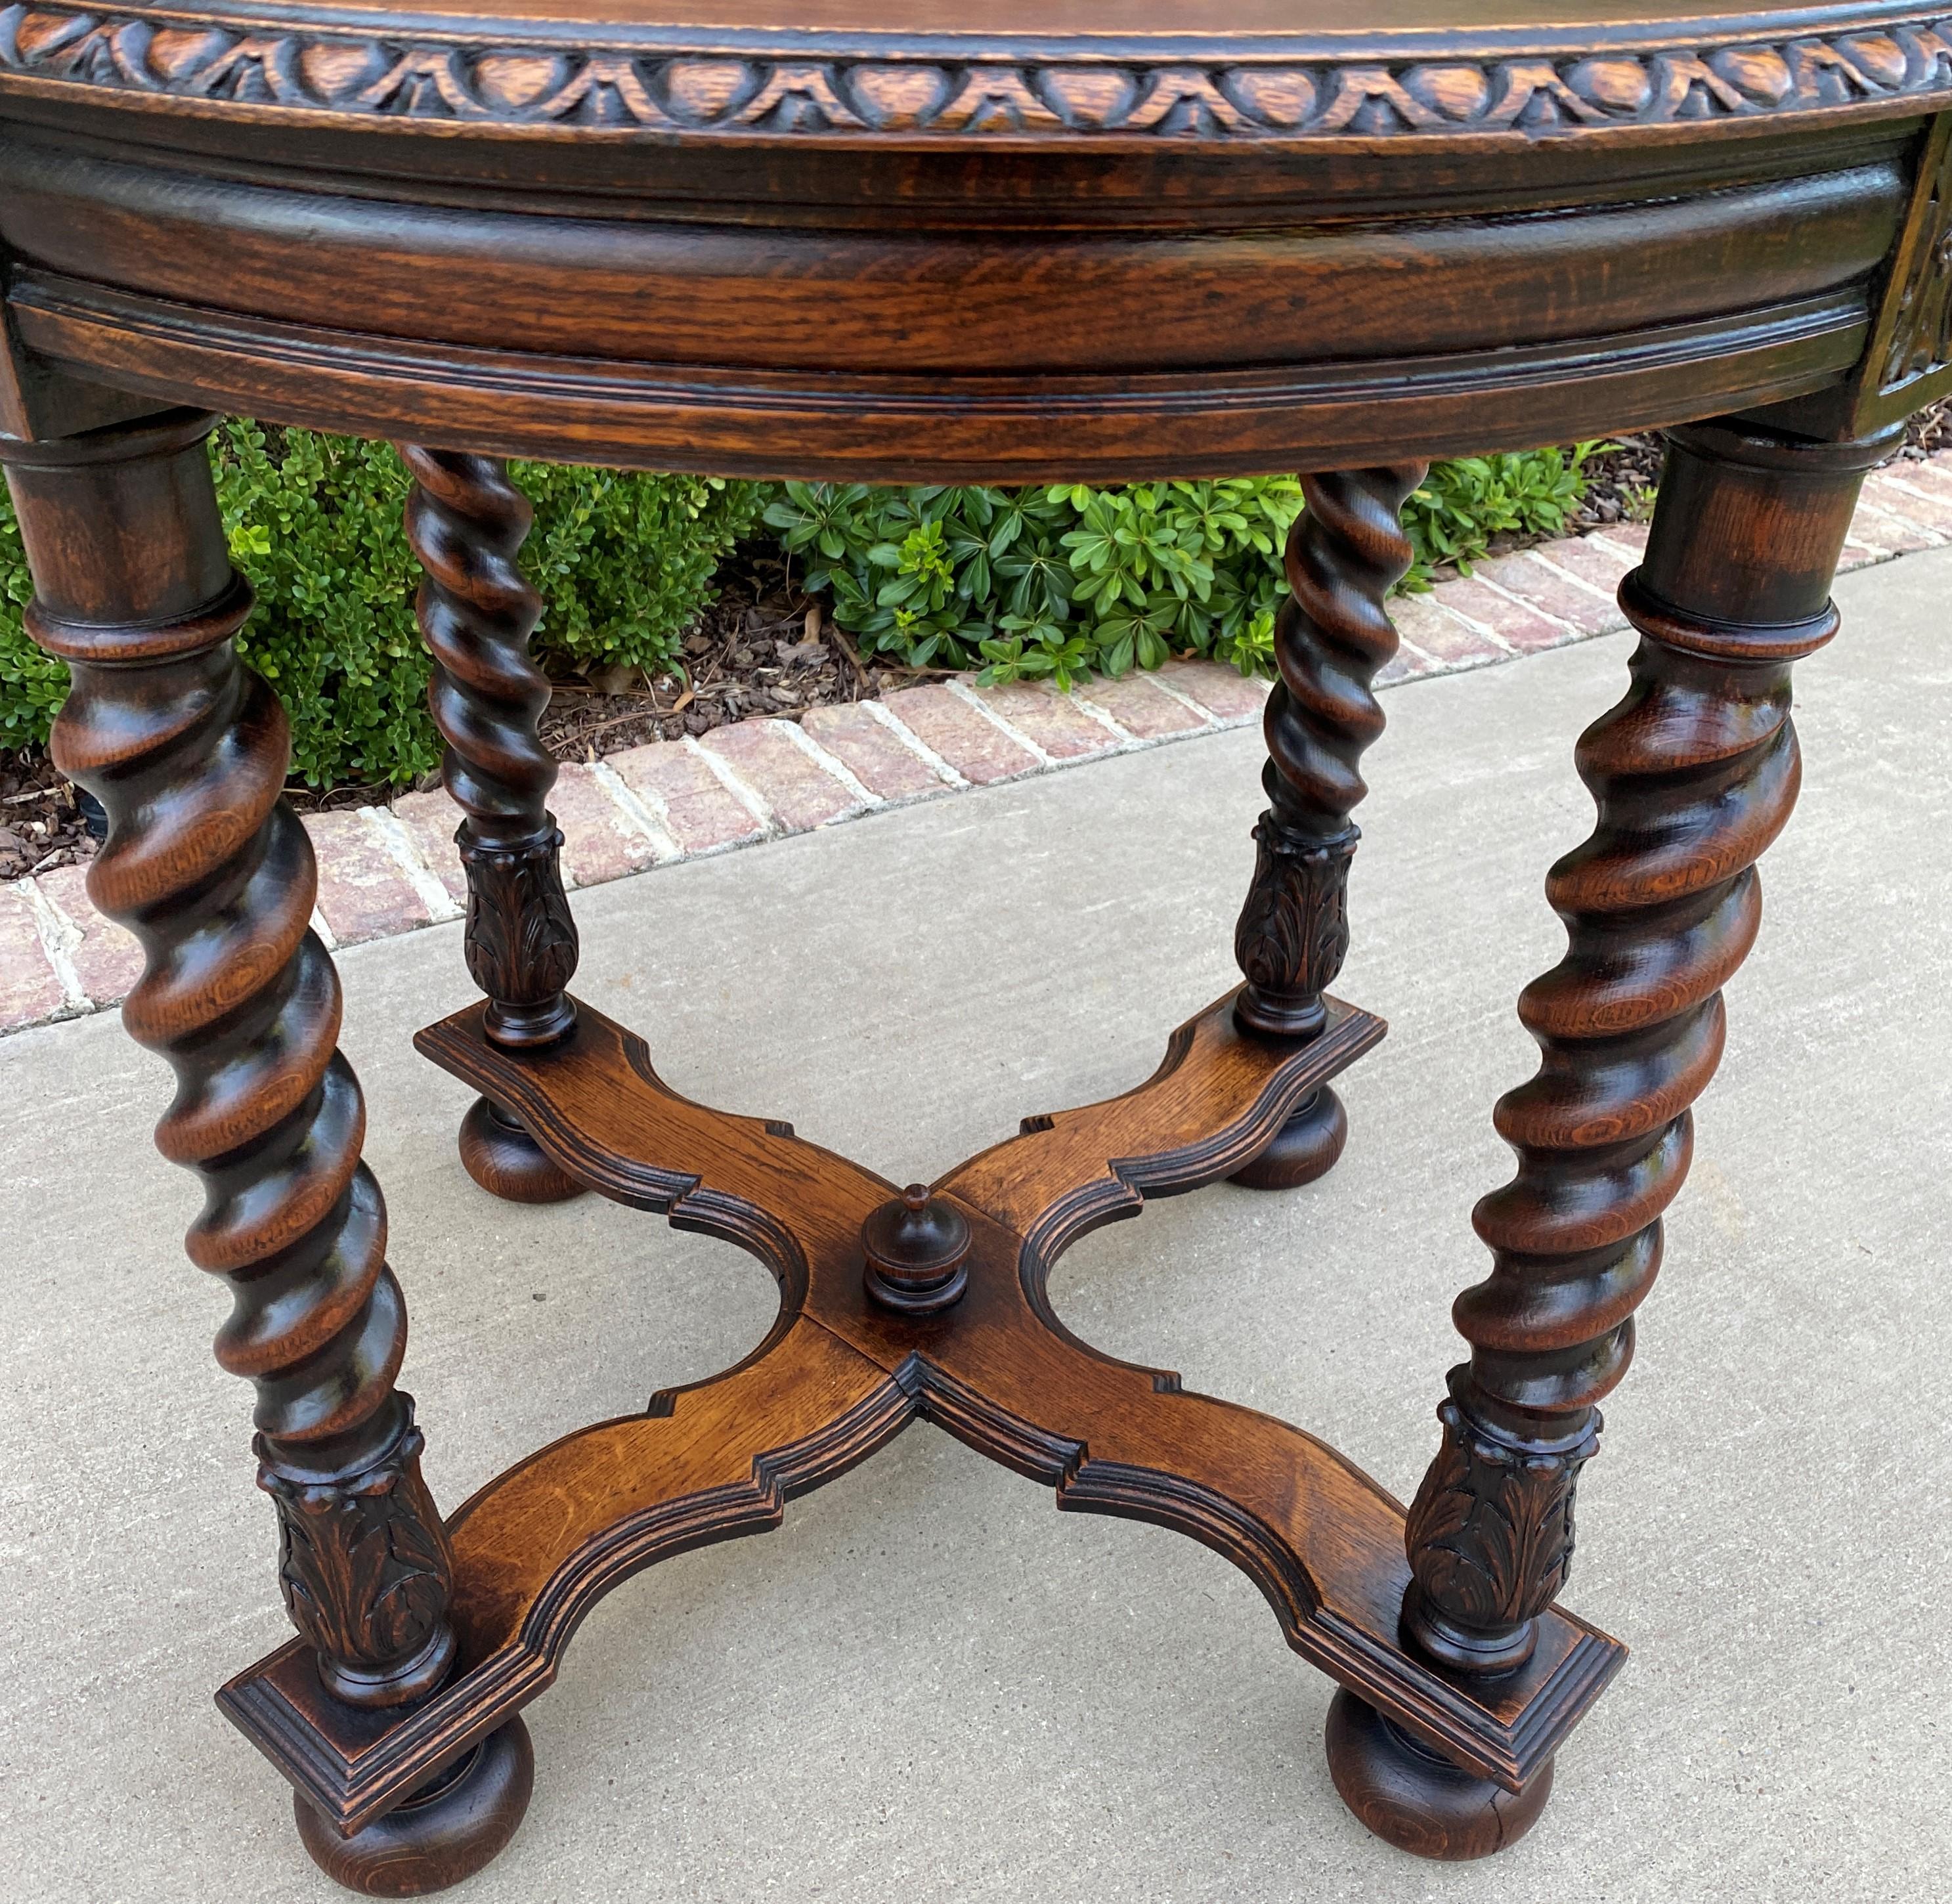 charming antique English oak round end table, occasional table or nightstand/bed table ~~barley twist legs~~c. 1930s

Round tables are so hard to find~~beautiful and versatile size with relief-carved beveled edge top, thick barley twist legs,